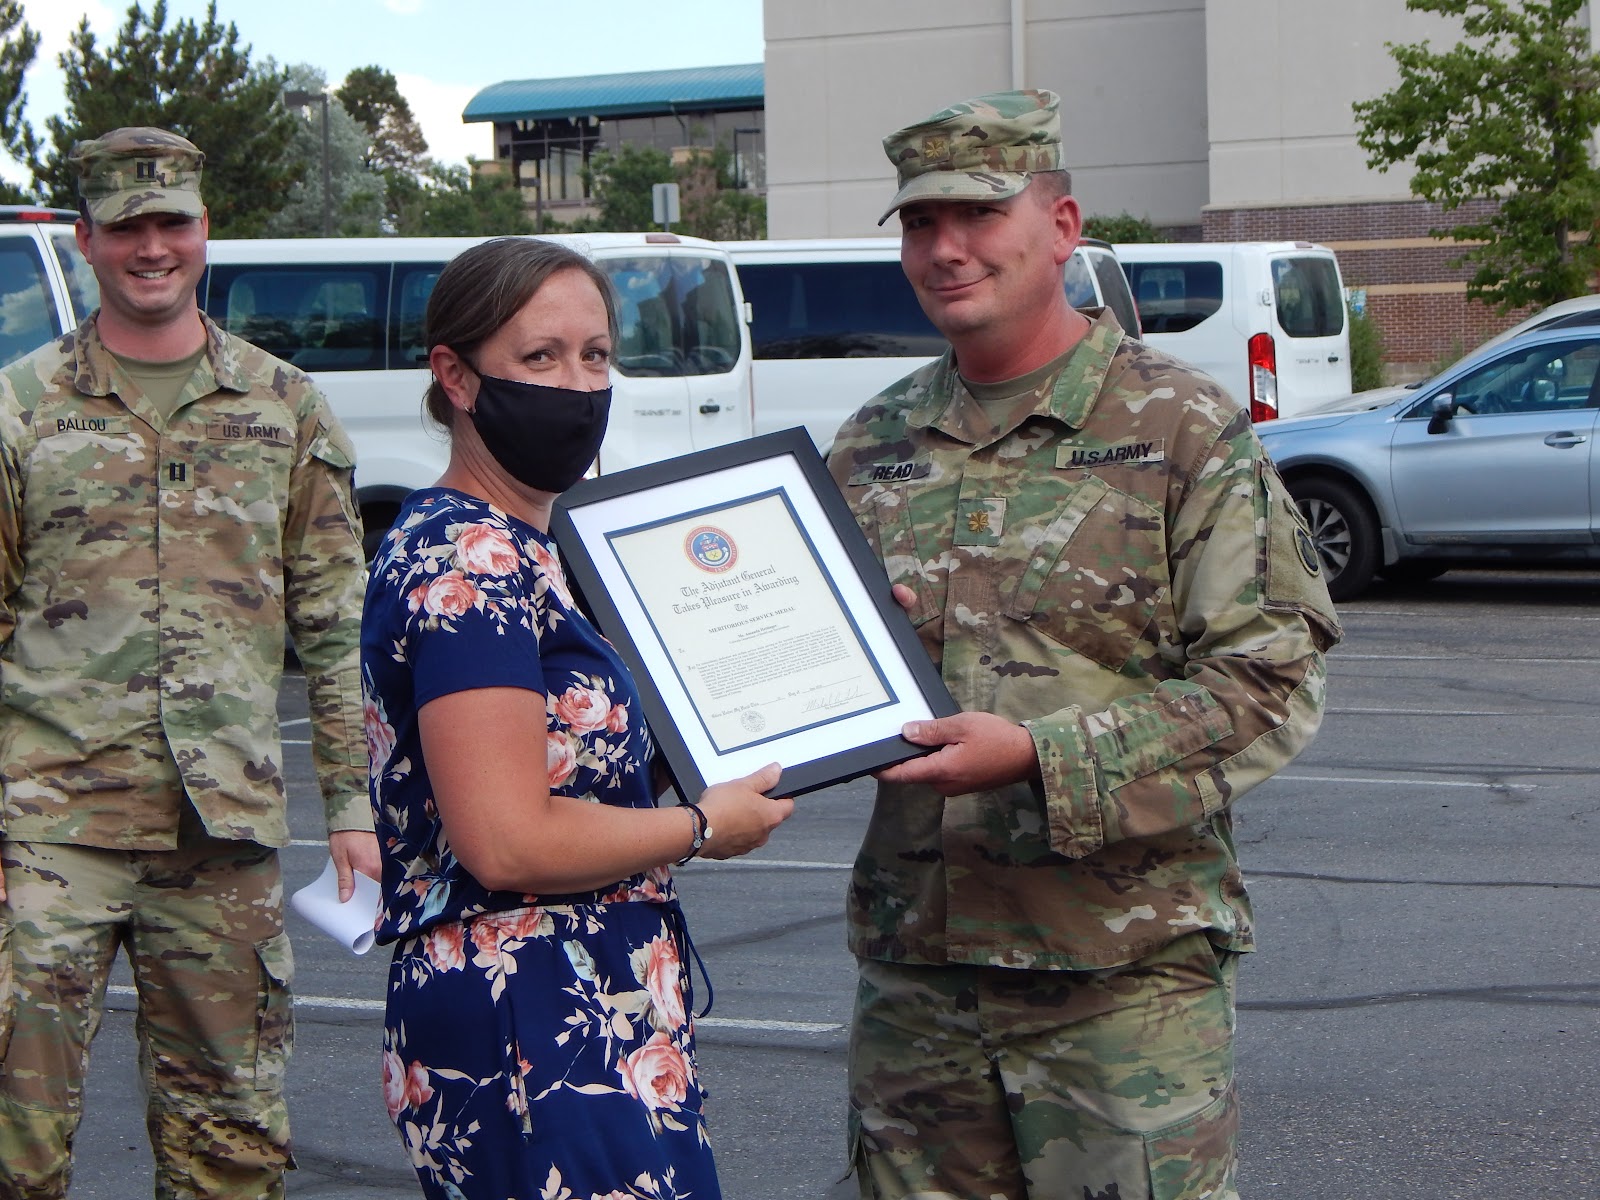 Amanda Hettinger receives her award from a US Army soldier in fatigues.